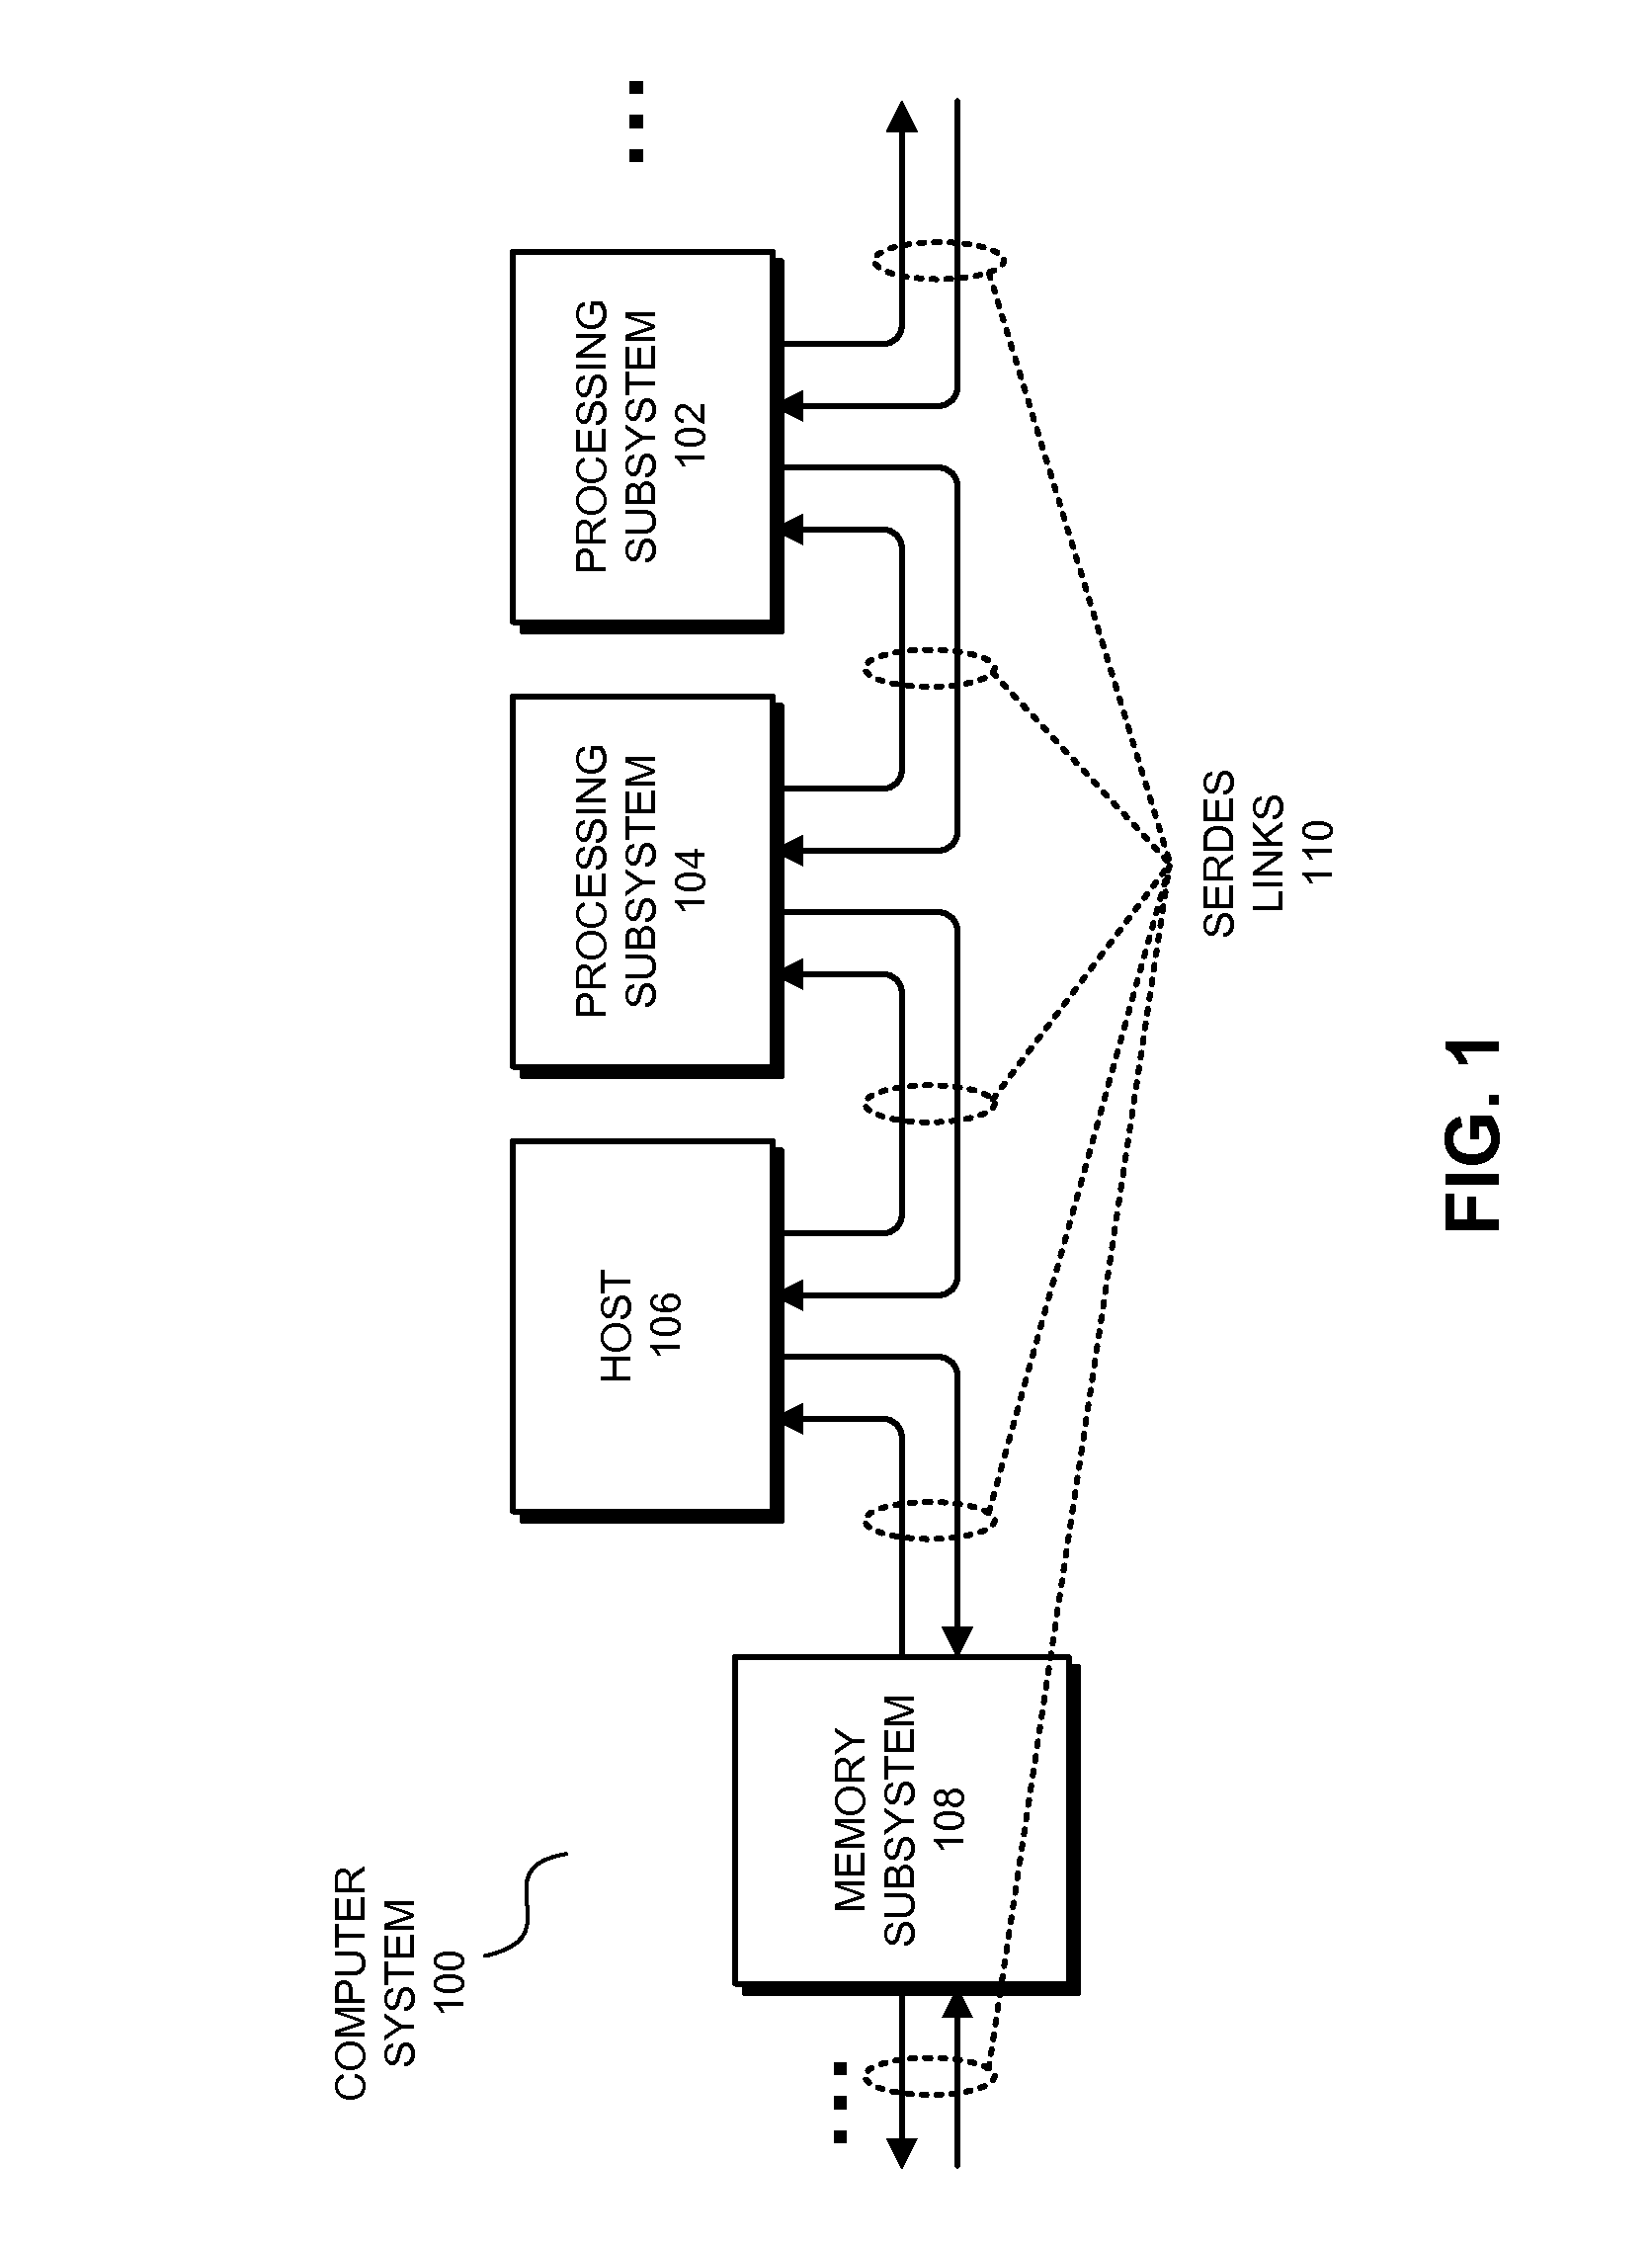 Method and apparatus for modulating the width of a high-speed link